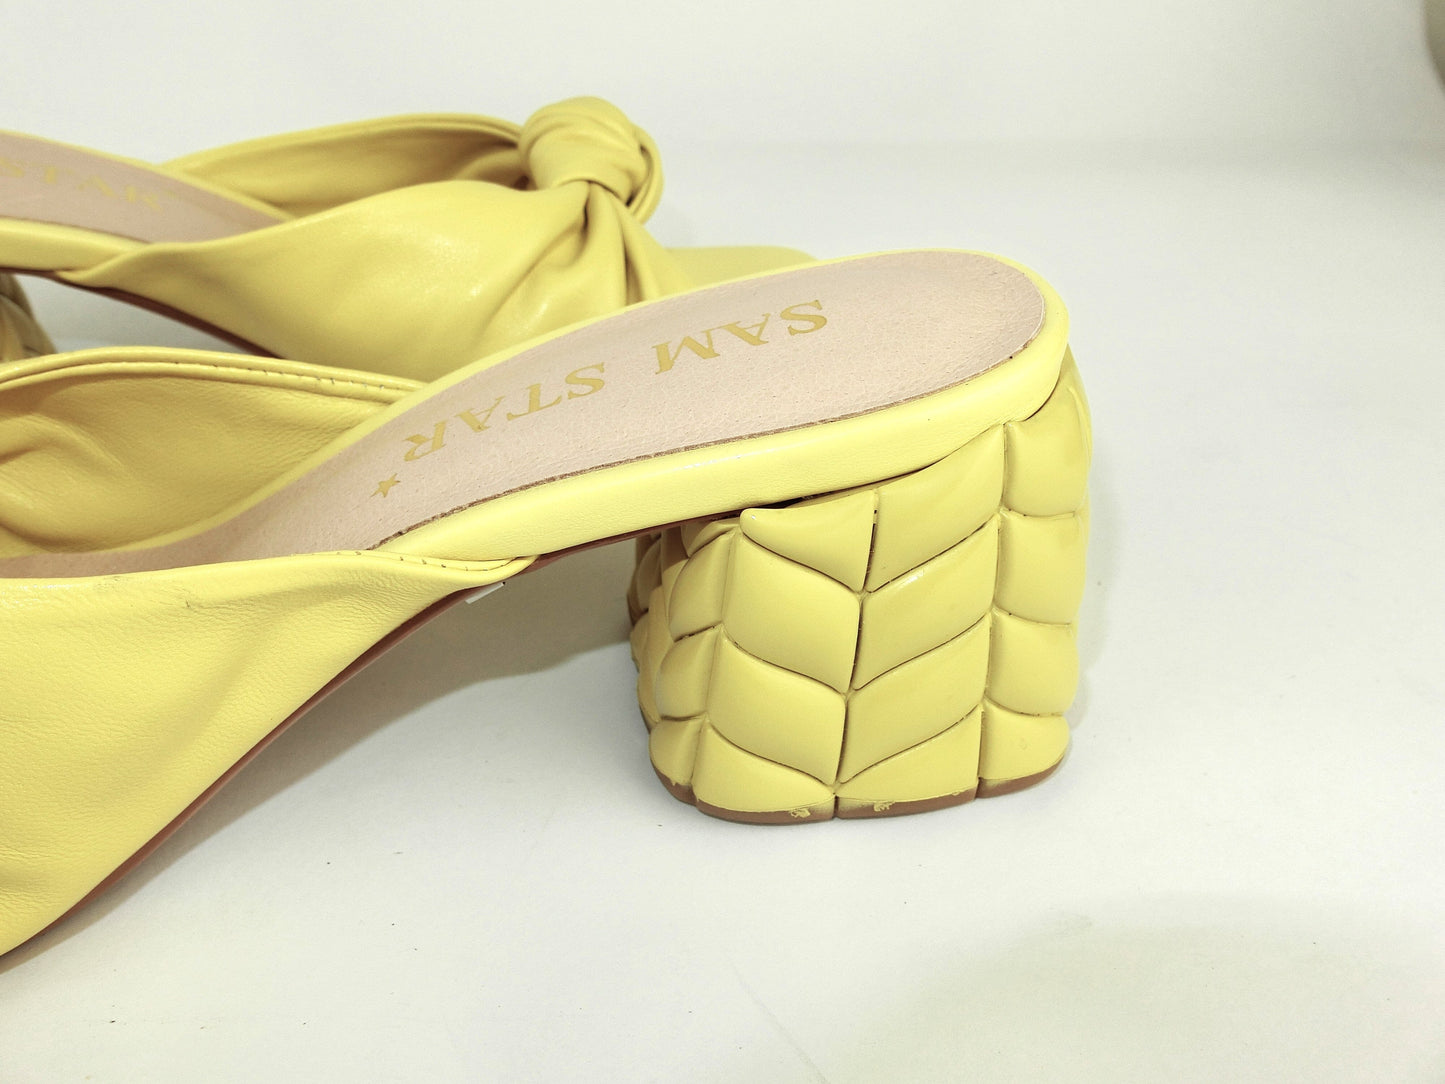 SS22014 Genuine leather bow tie block heel sandals in Yellow sandals Sam Star Shoes 